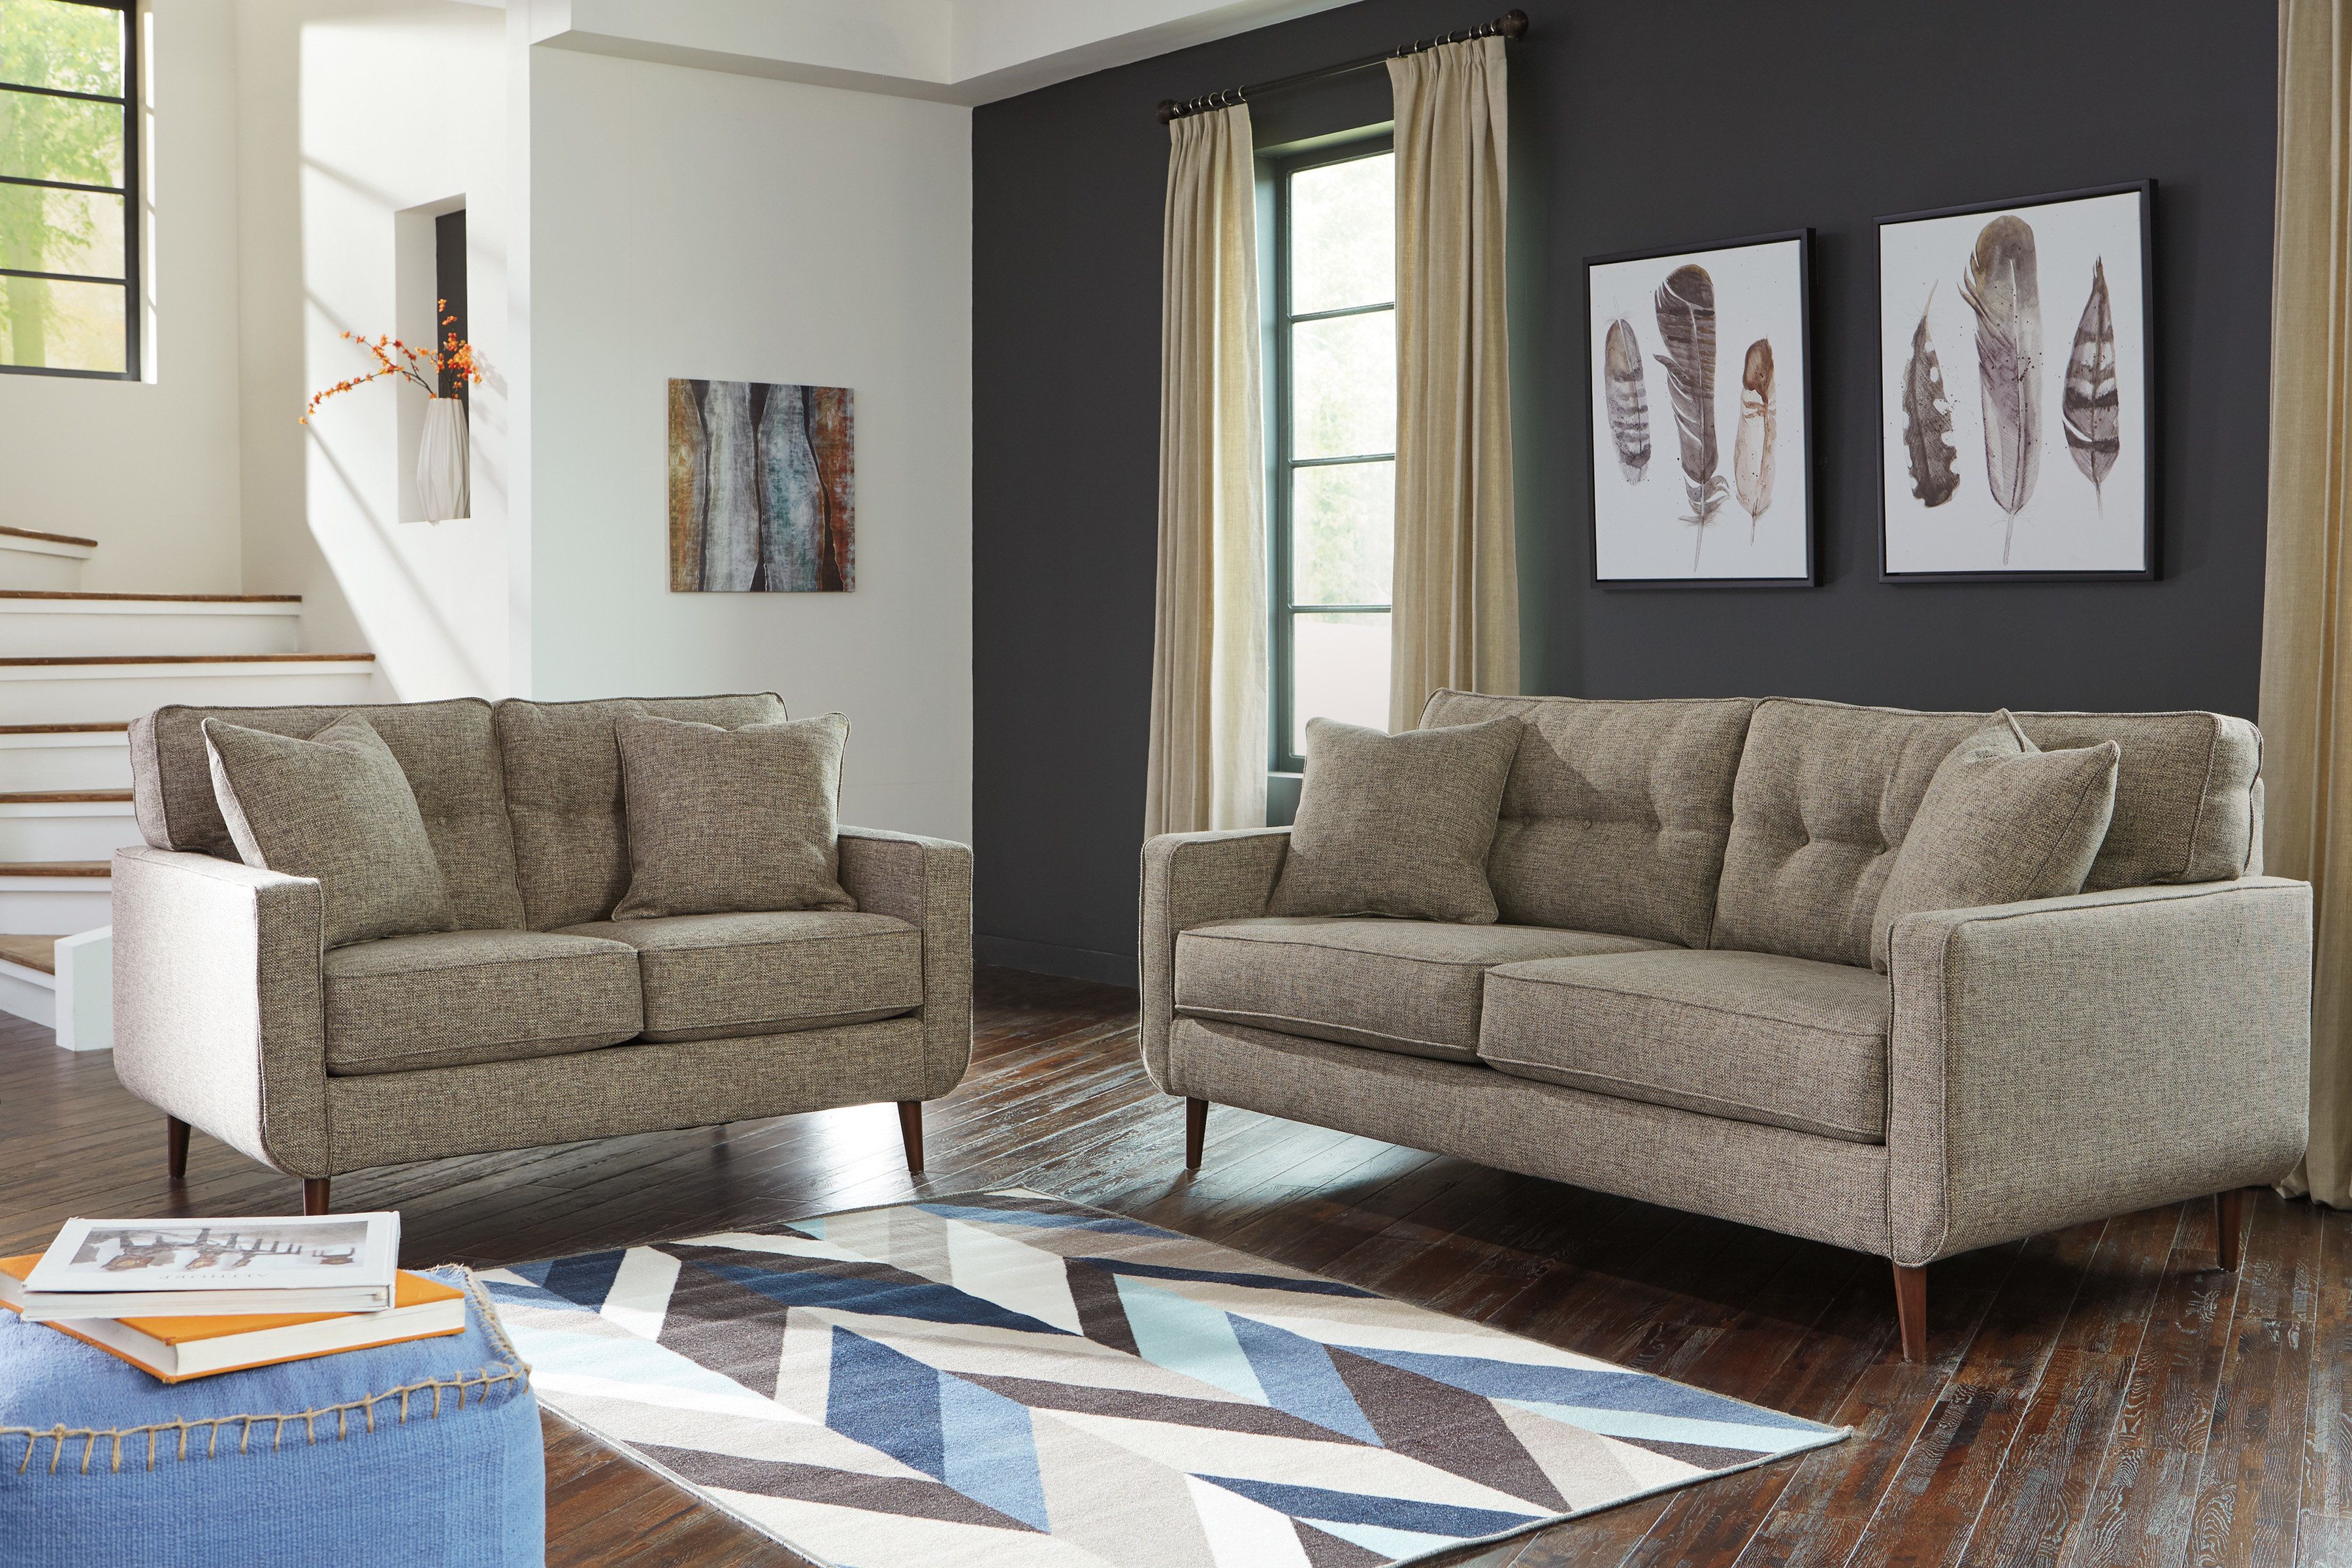 Bungalow Rose Grandin Configurable Living Room Set | Wayfair With Regard To Grandin Leather Sofa Chairs (View 13 of 20)